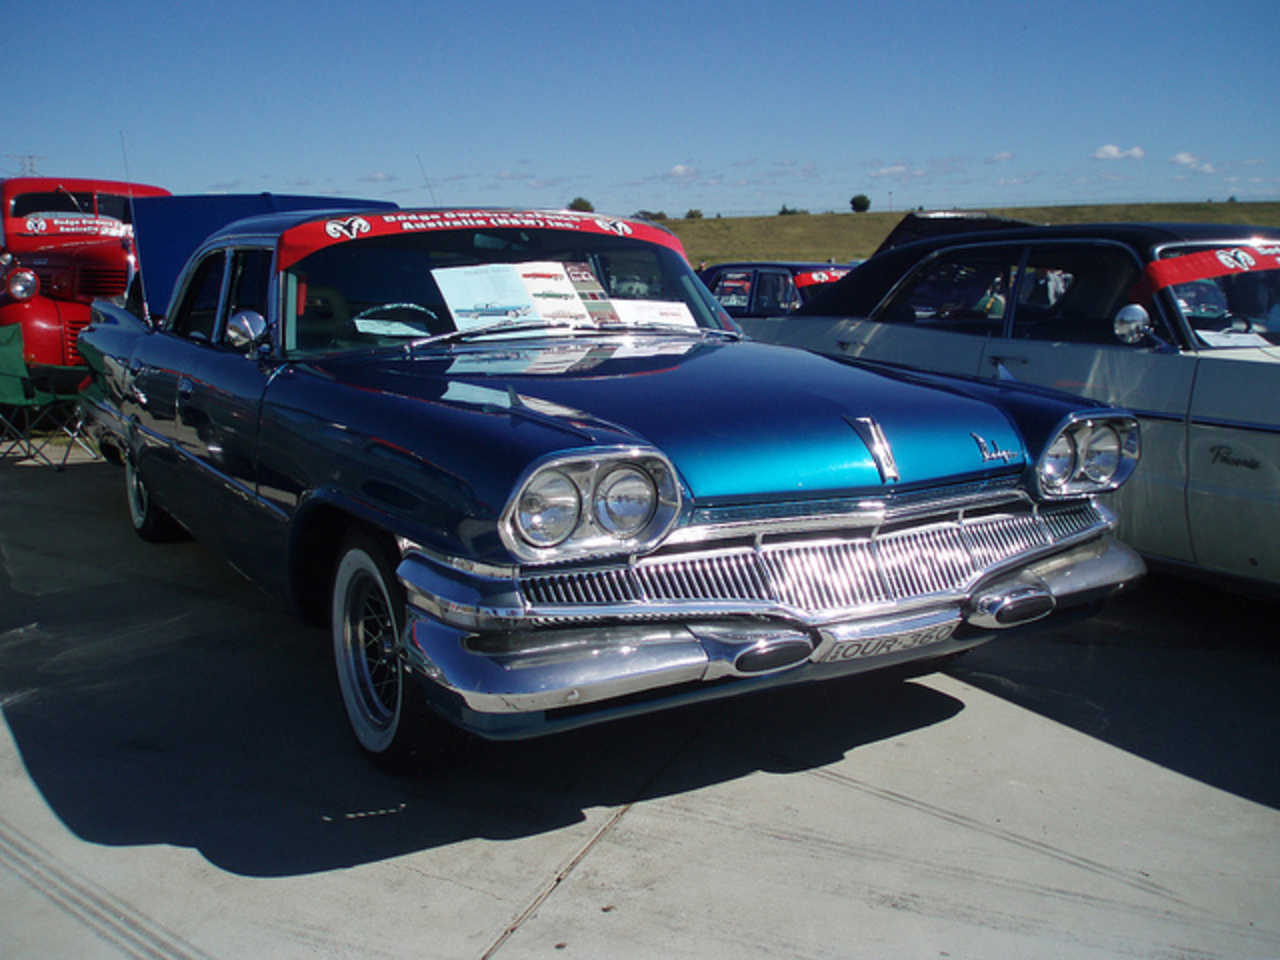 1960 Dodge - a gallery on Flickr